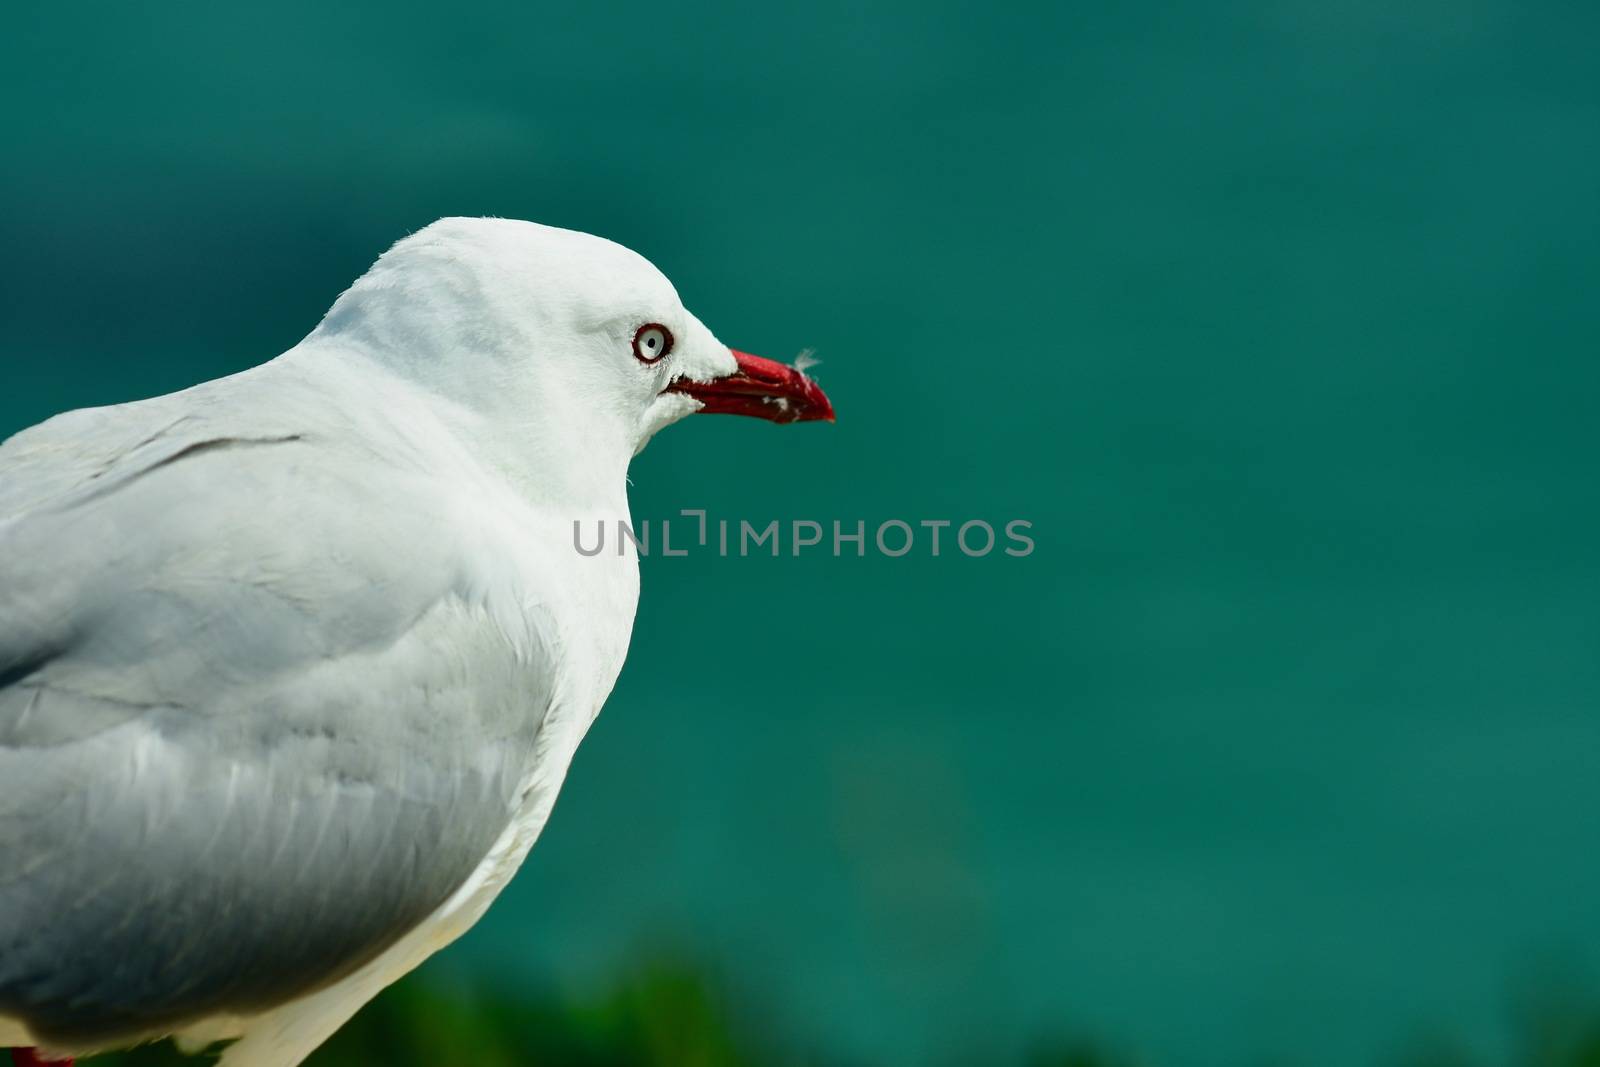 A close-up photo of a bird; mature red-beaked sea gull in natural environment